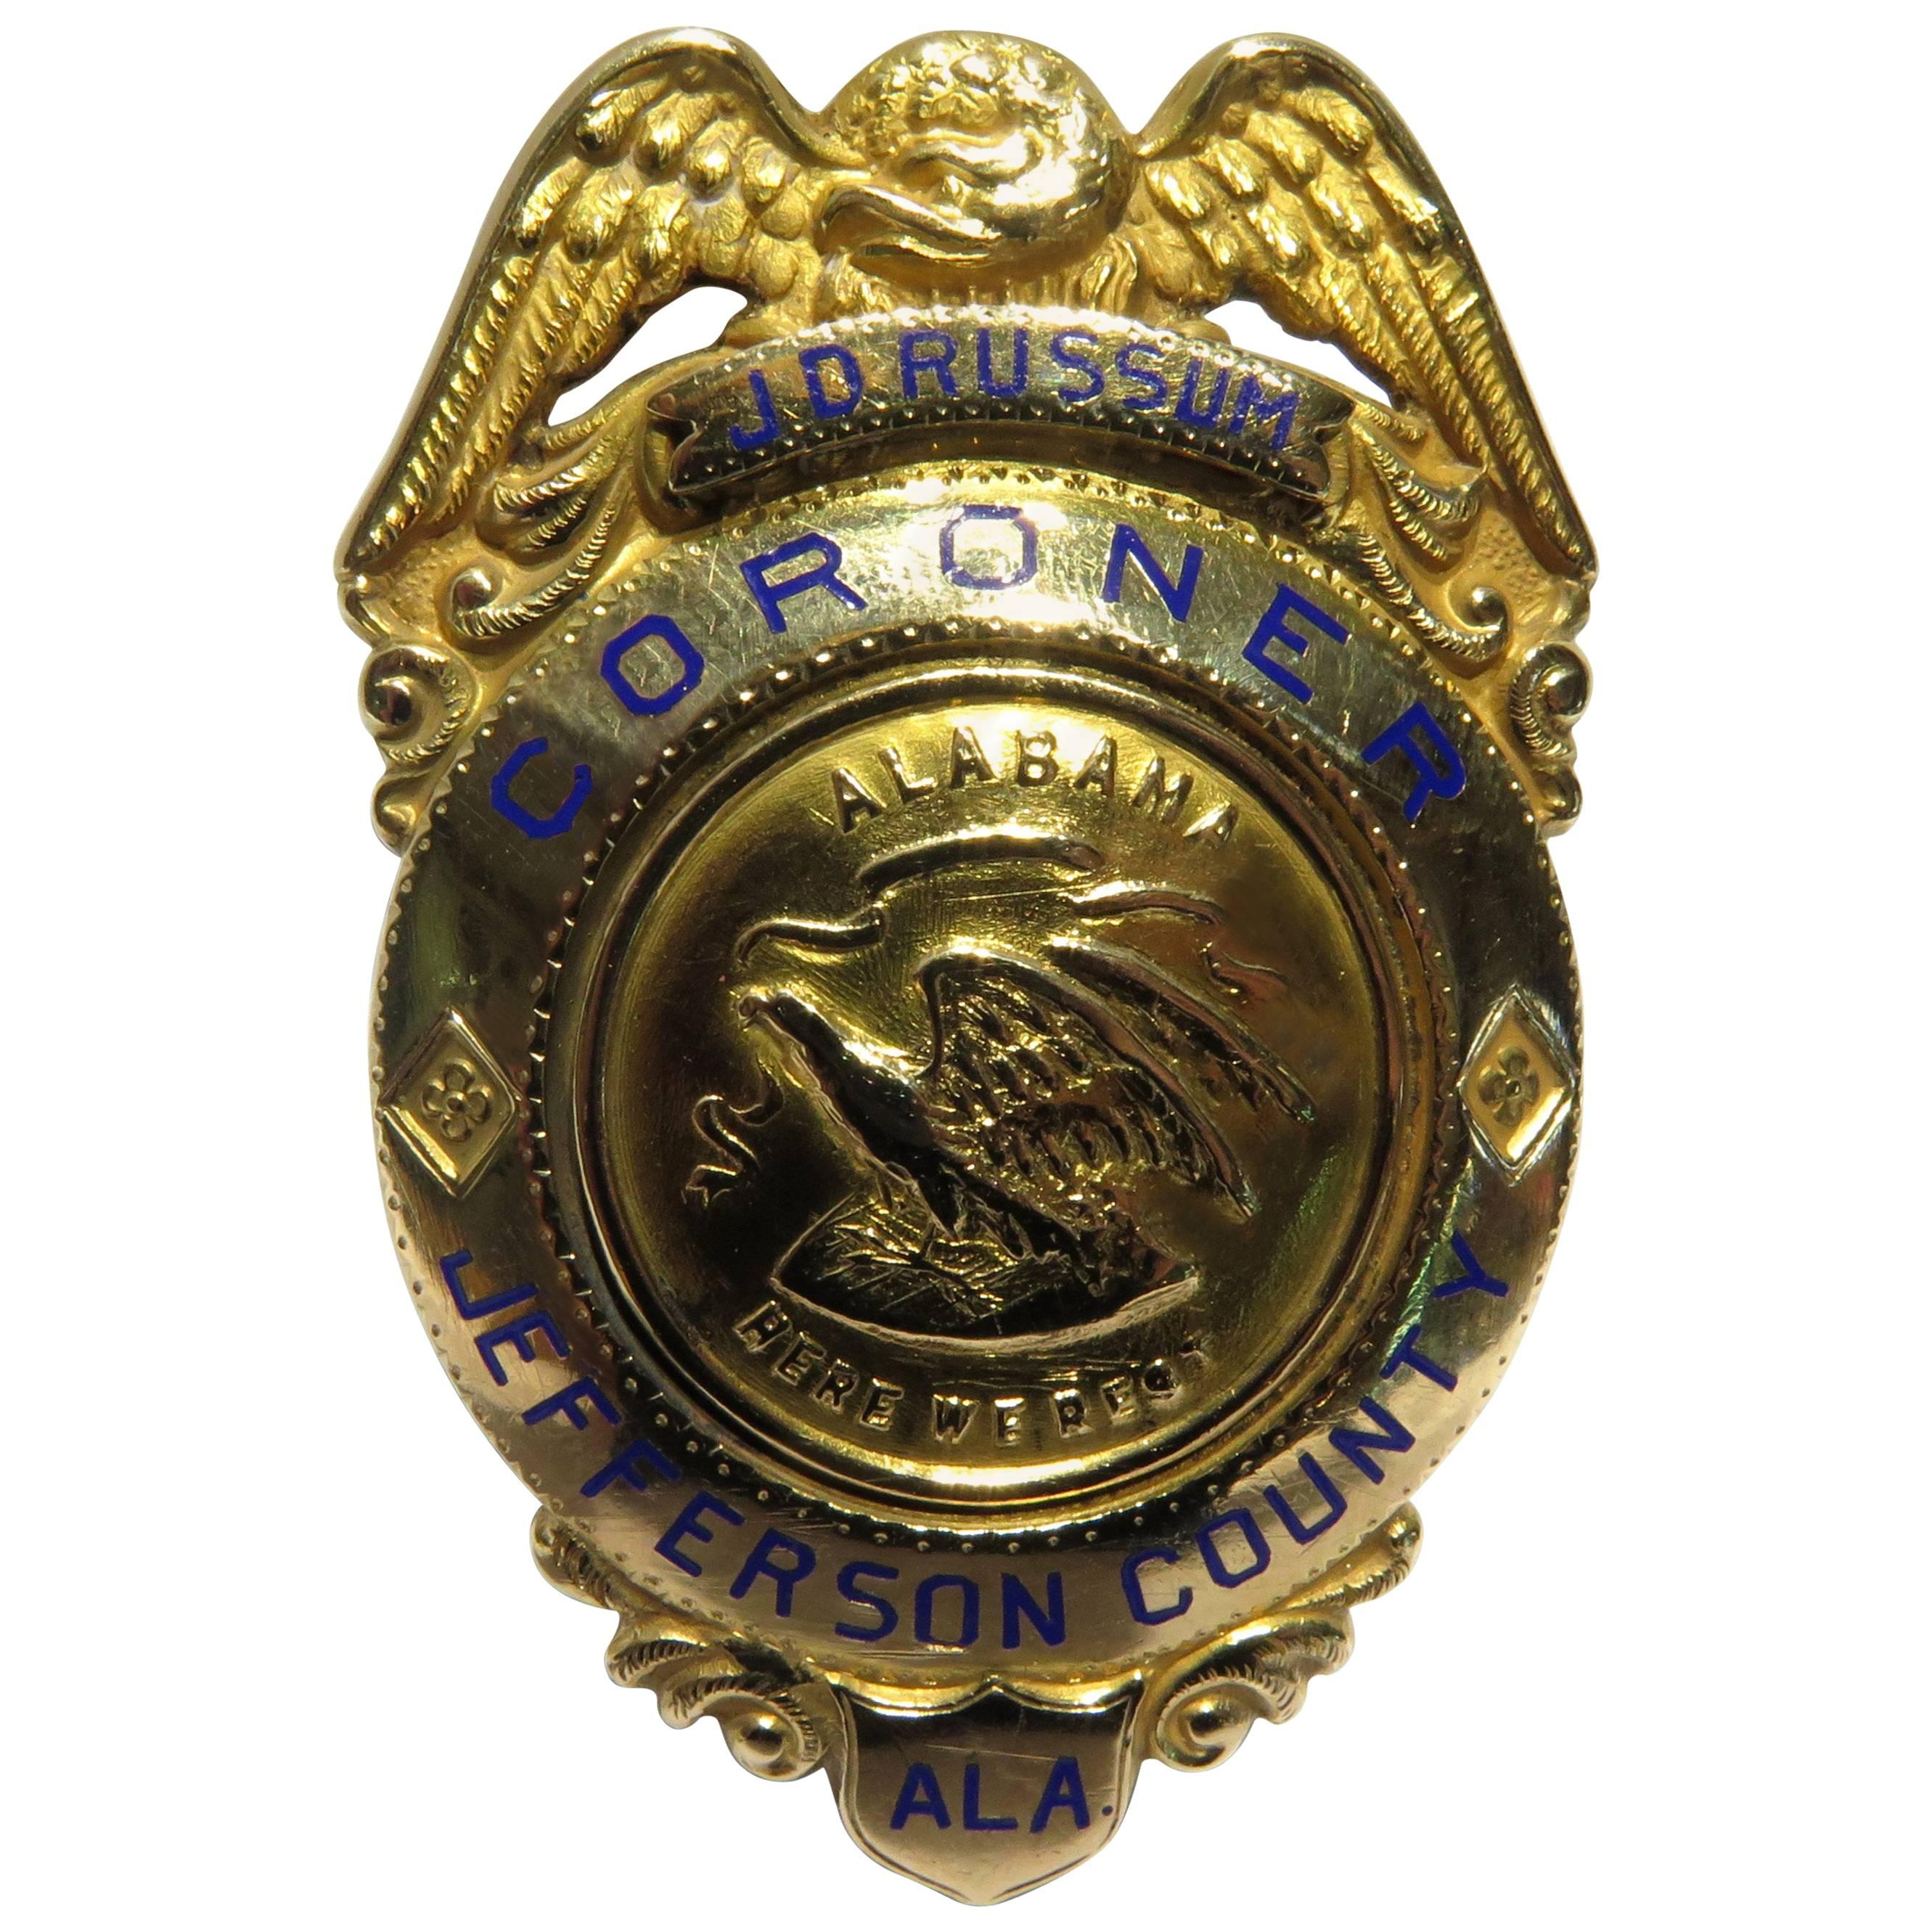 J.D. Russum Gold Coroner Jefferson County Al Badge 'Part of Alabama History' For Sale